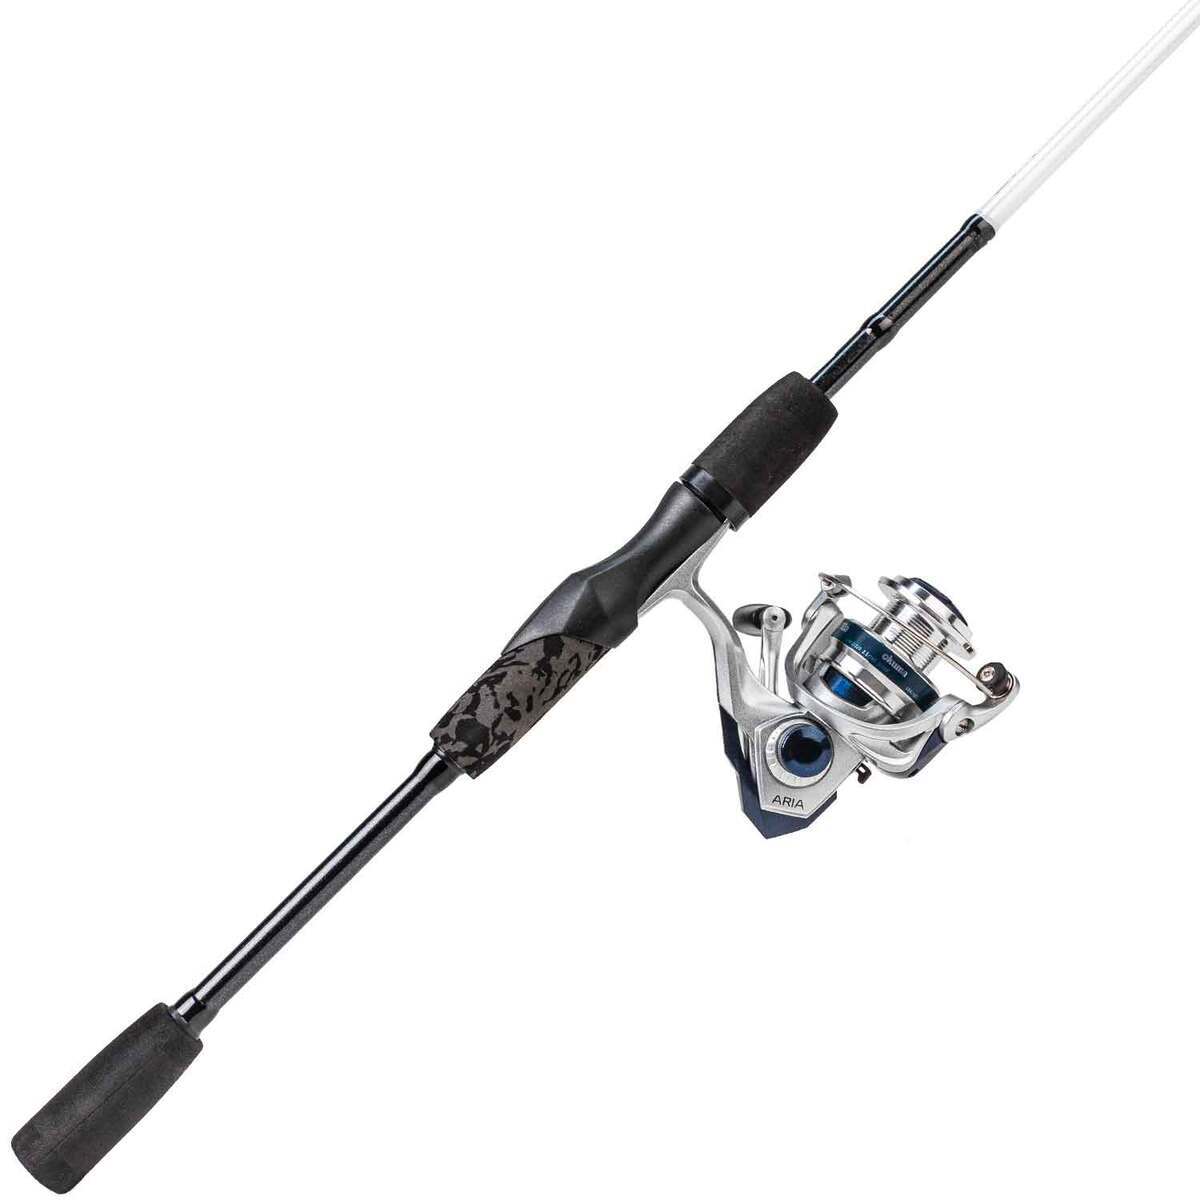 10 Okuma Saltwater Rods ideas  saltwater, rods, fishing products